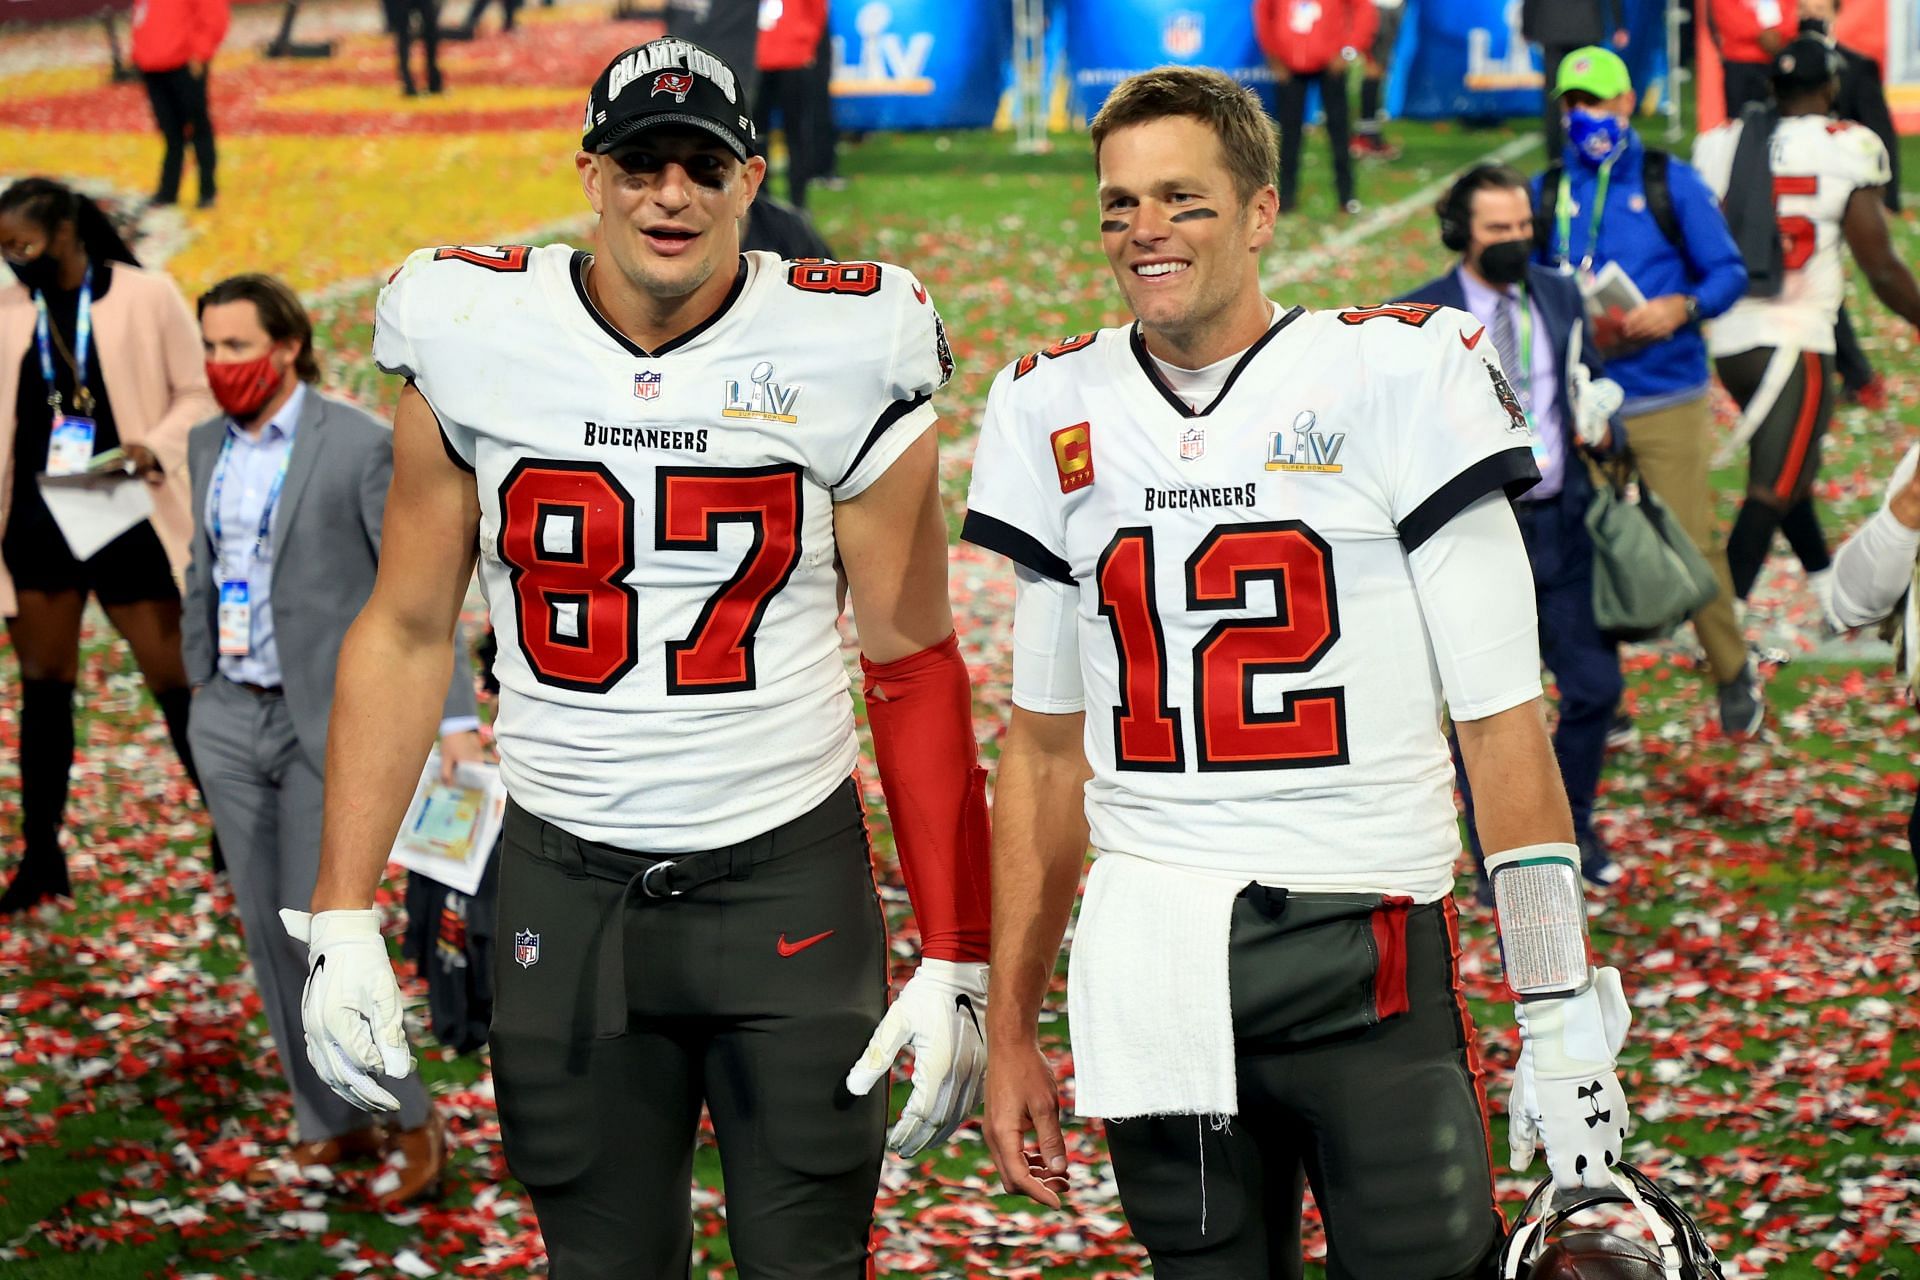 The duo of Tom Brady and Rob Gronkowski after the Buccaneers&#039; win in Super Bowl LV